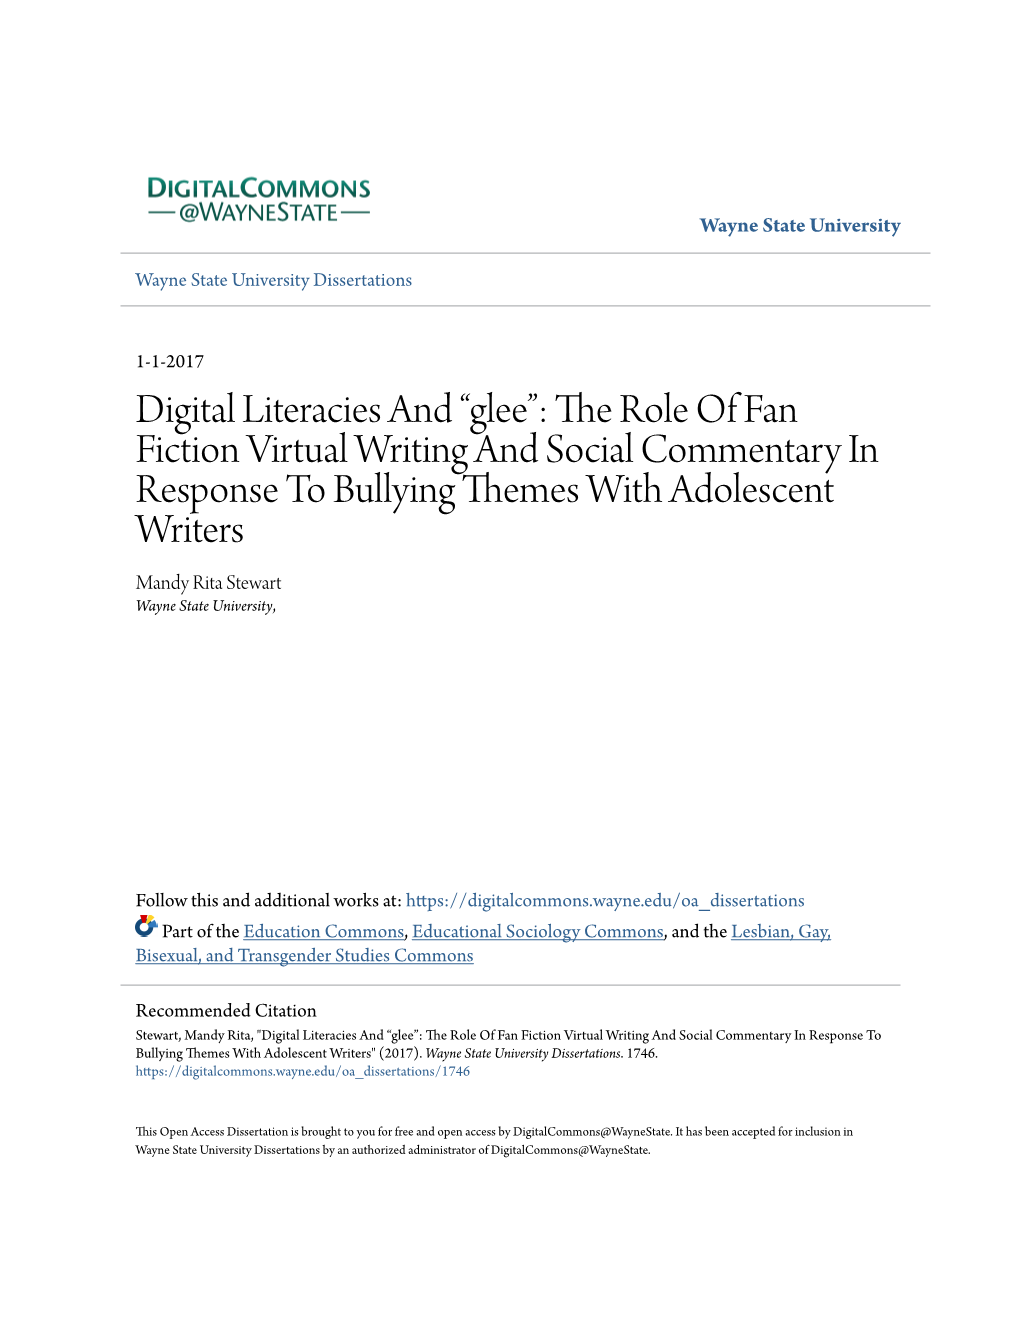 Glee”: the Role of Fan Fiction Virtual Writing and Social Commentary in Response to Bullying Themes with Adolescent Writers Mandy Rita Stewart Wayne State University